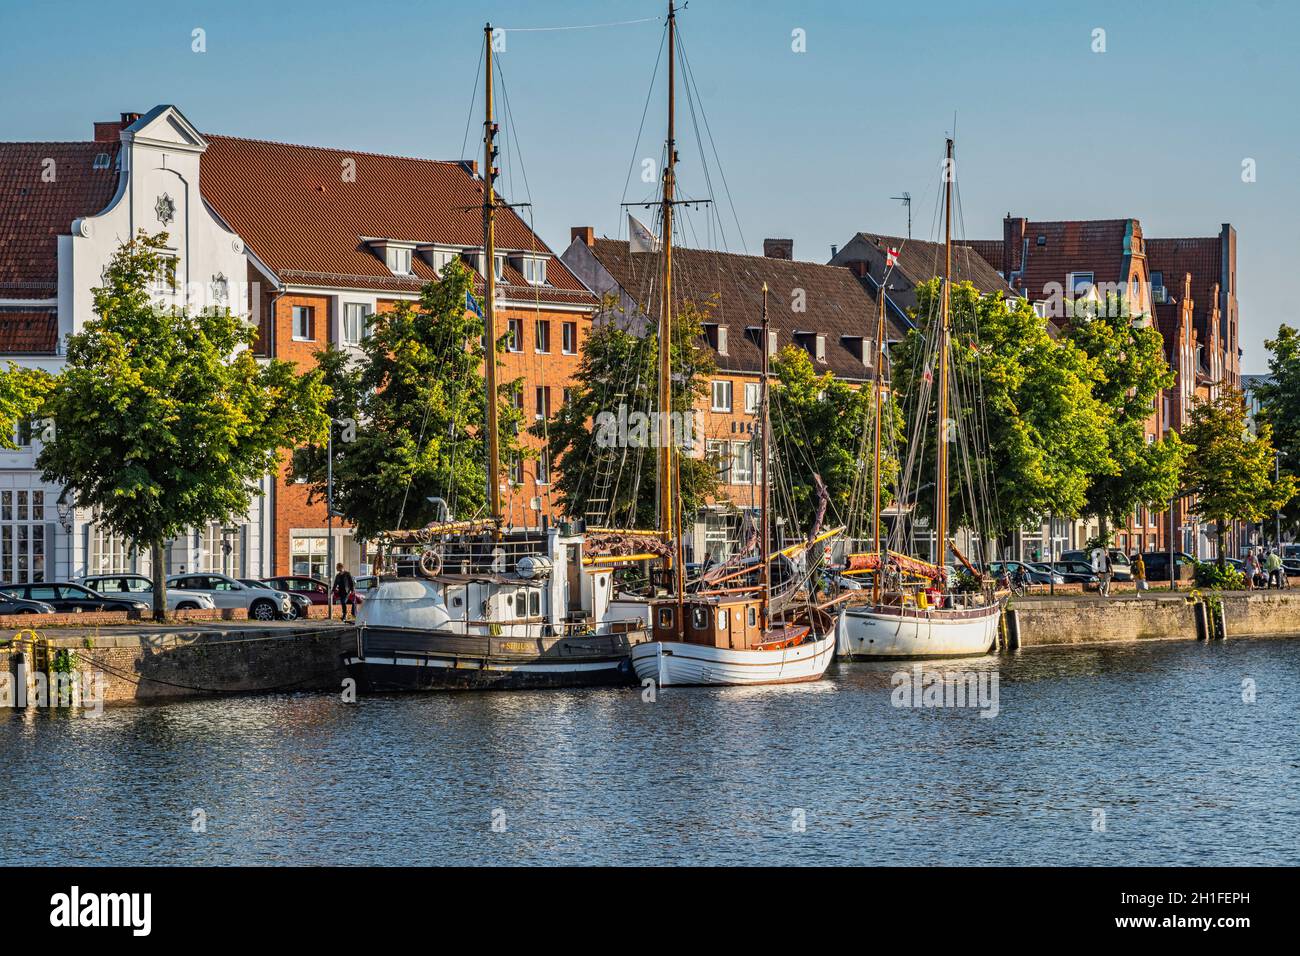 Lübeck, fishing and touring boats moored on the river Trave, houses with traditional architecture overlook the long river. Lubeck, Germany Stock Photo